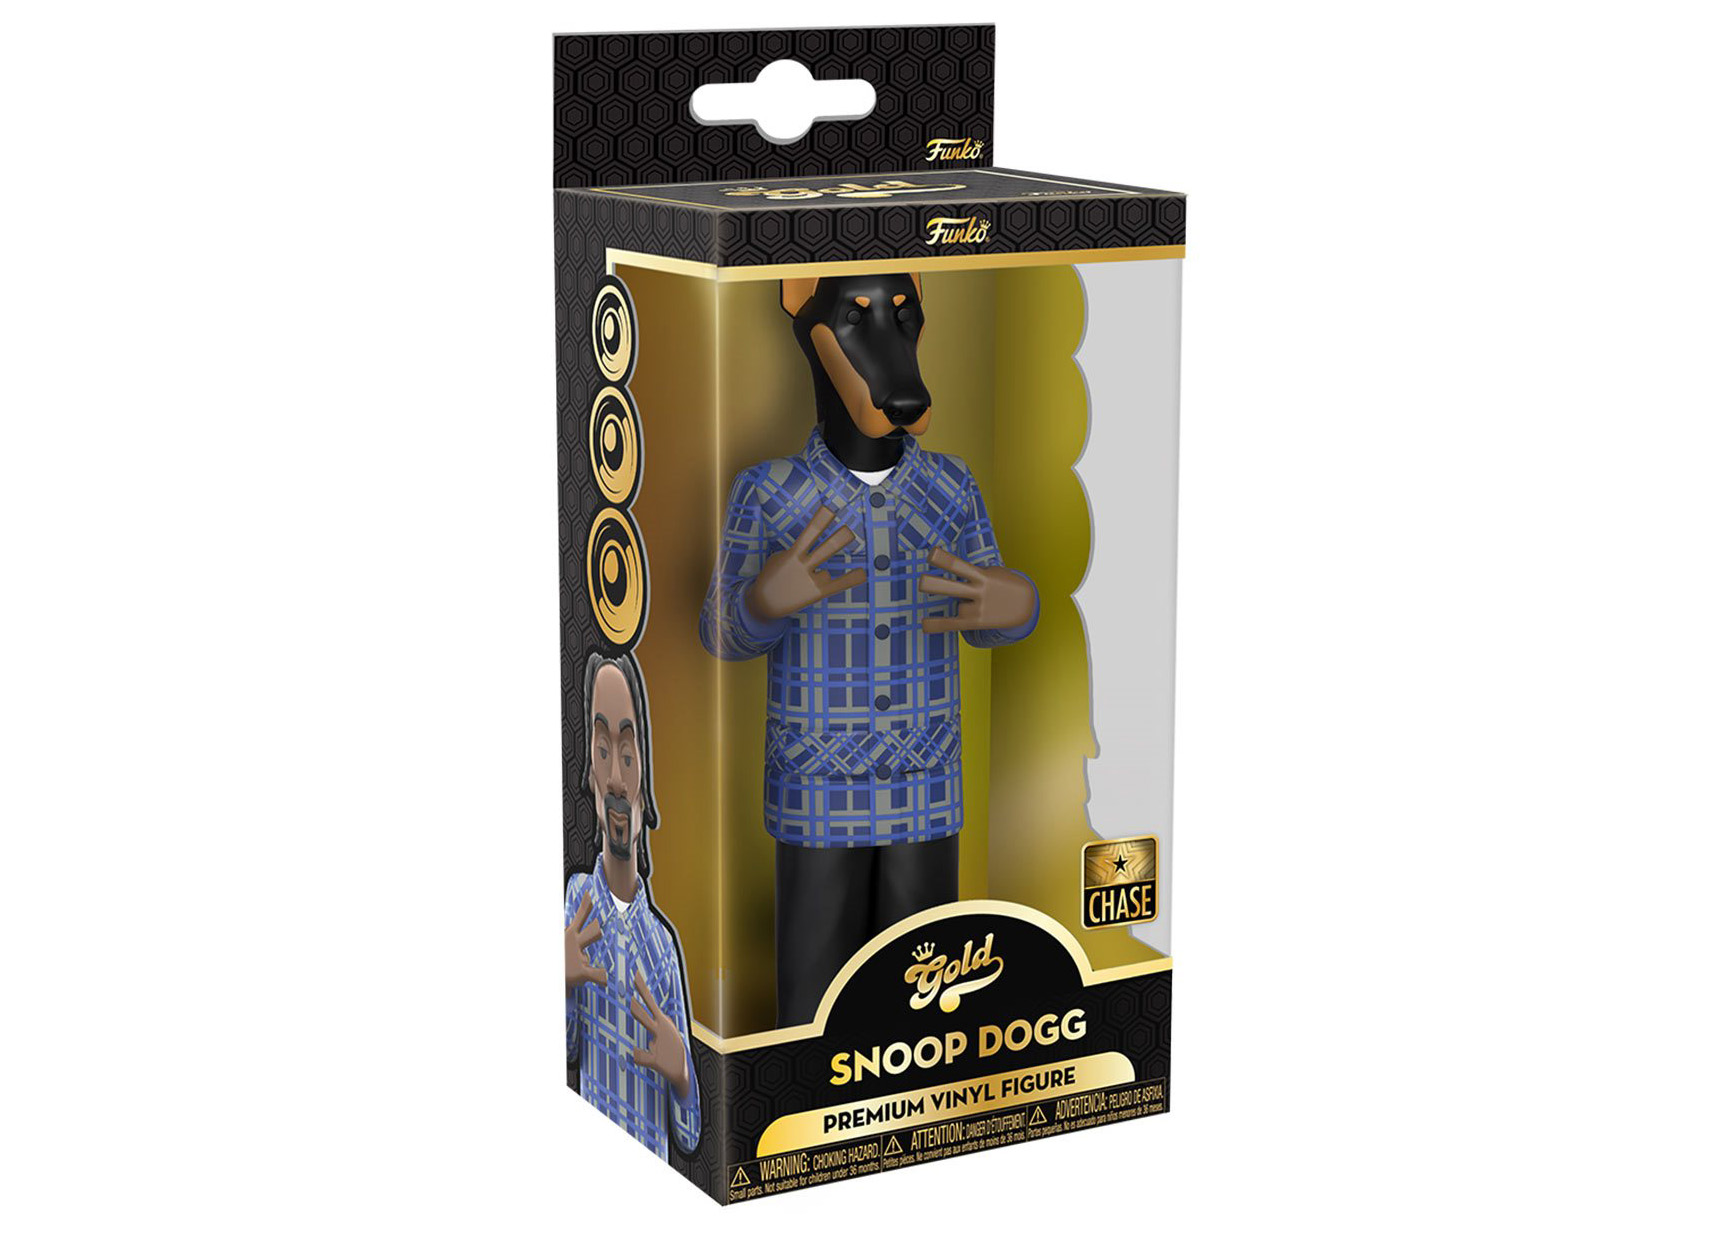 Funko Gold Snoop Dogg 5 Inch Chase Edition Figure - US